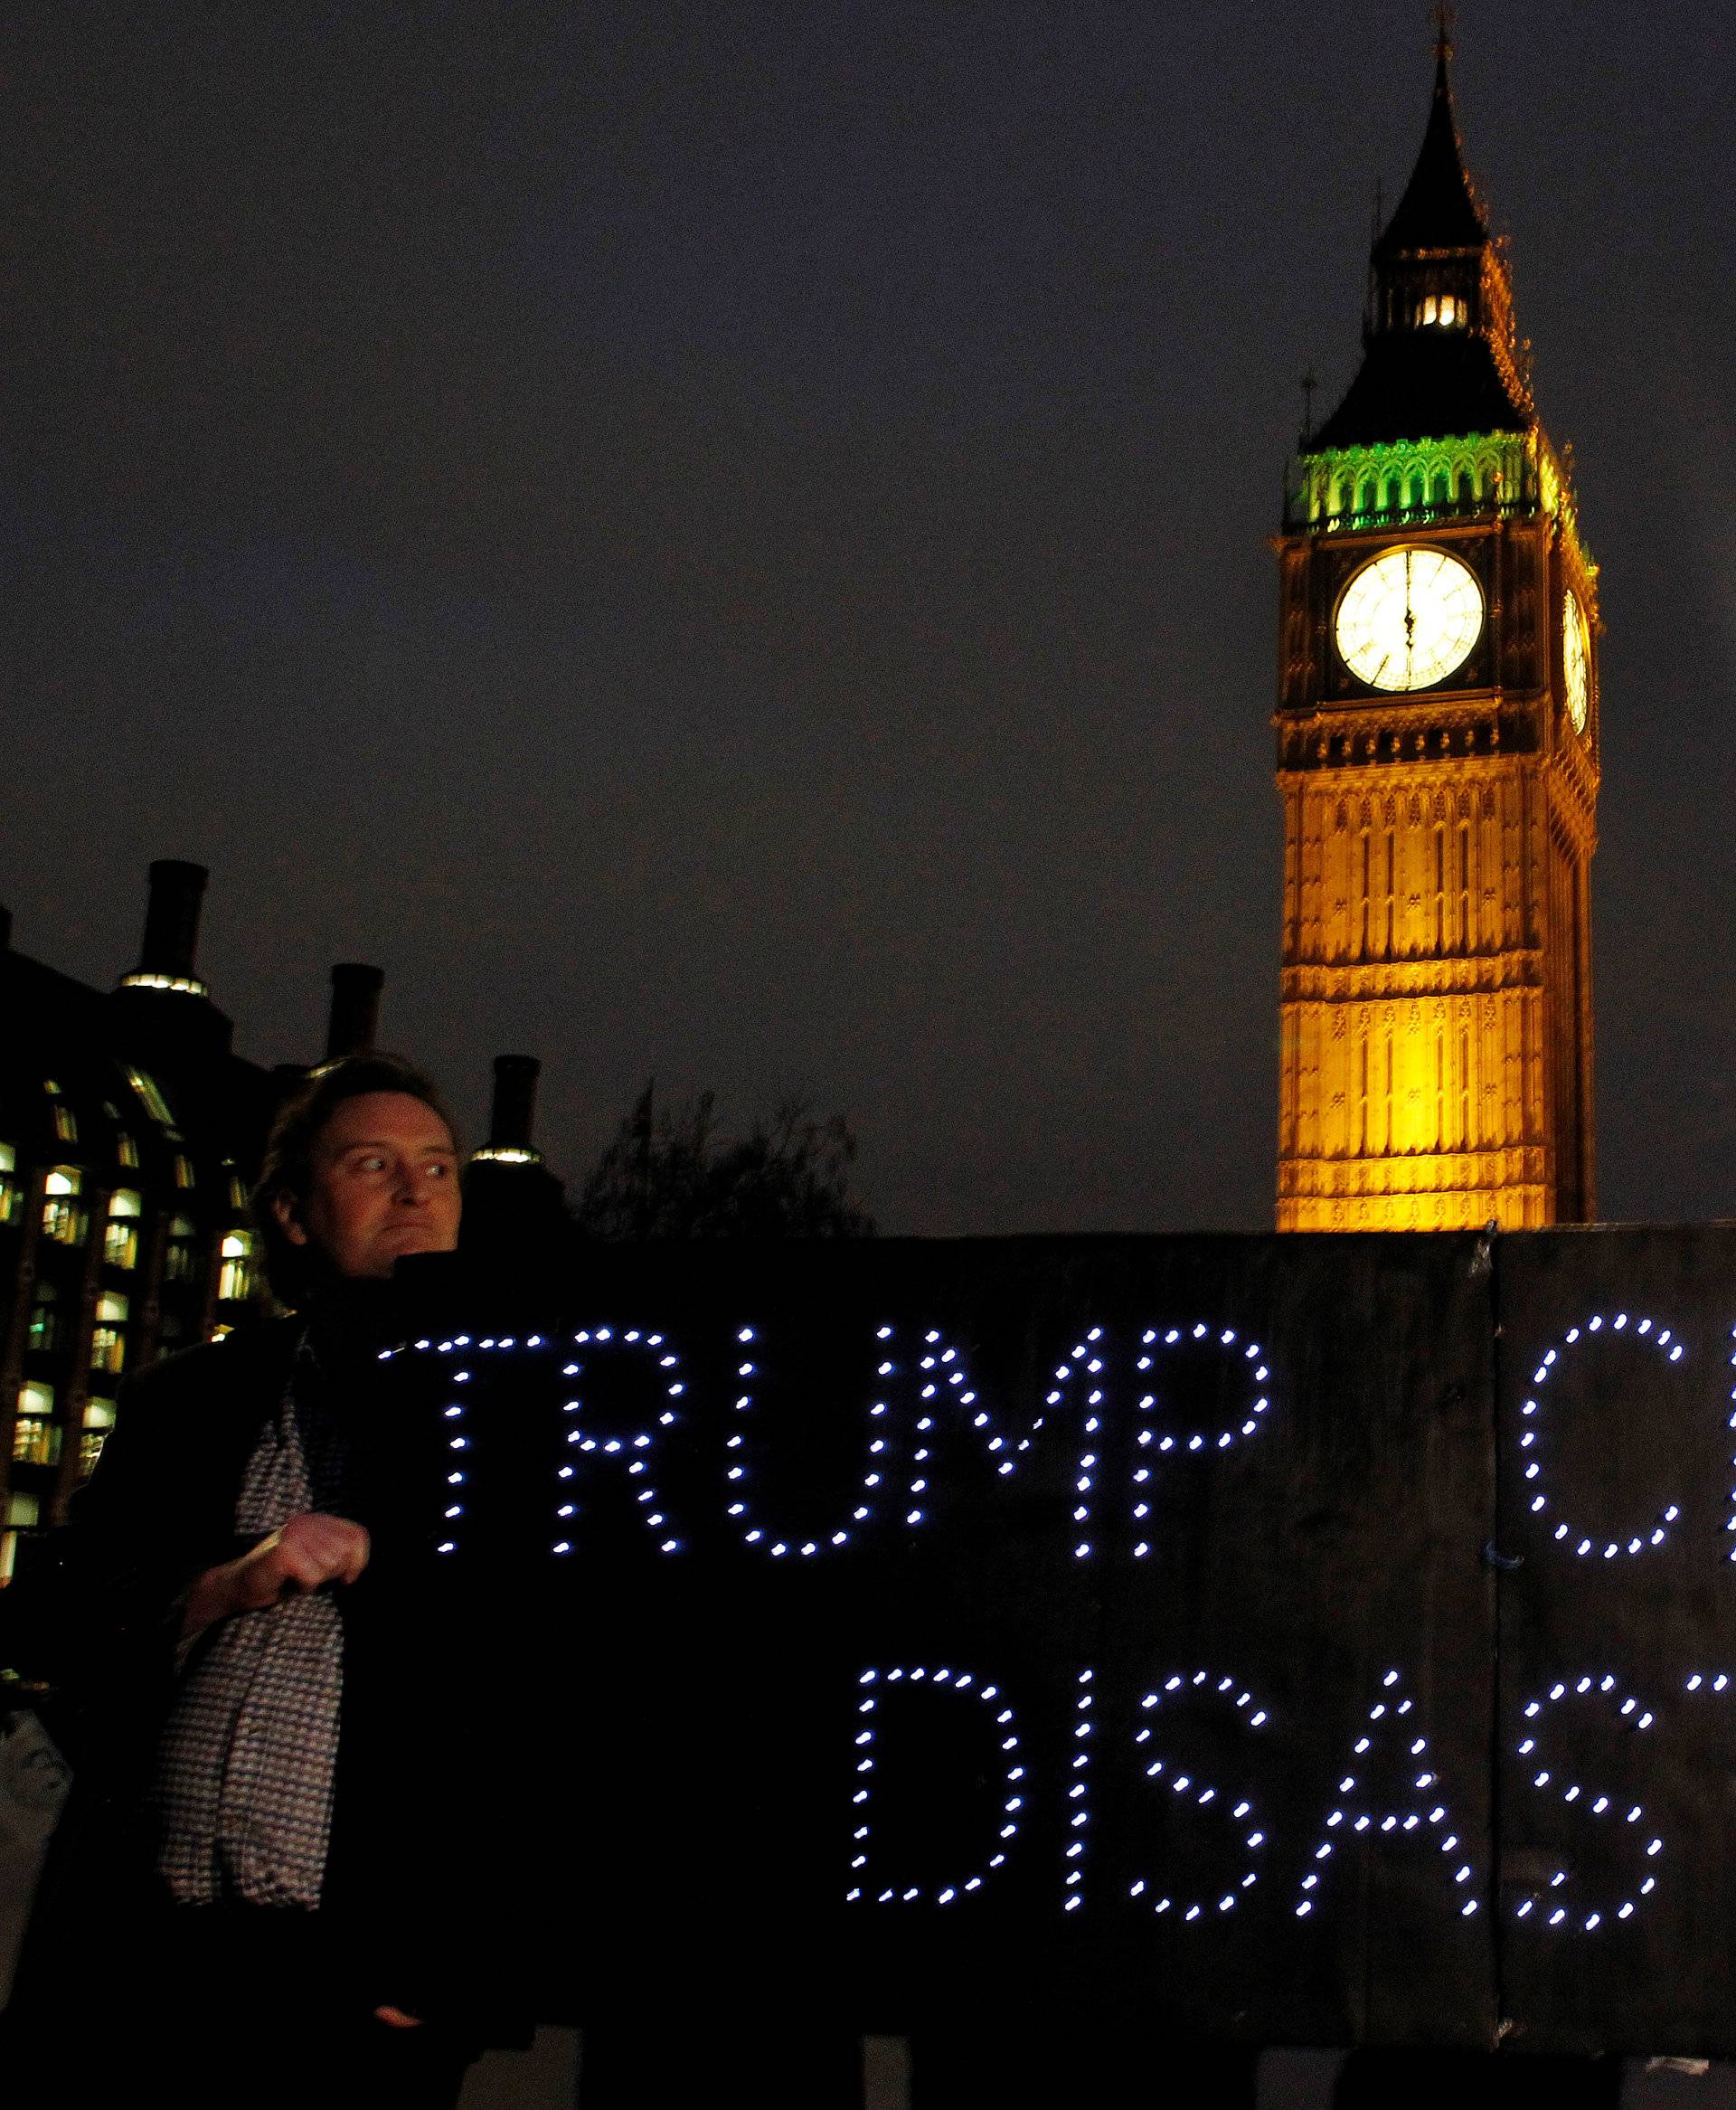 Demonstrators hold a banner during a protest against U.S. President Donald Trump in London